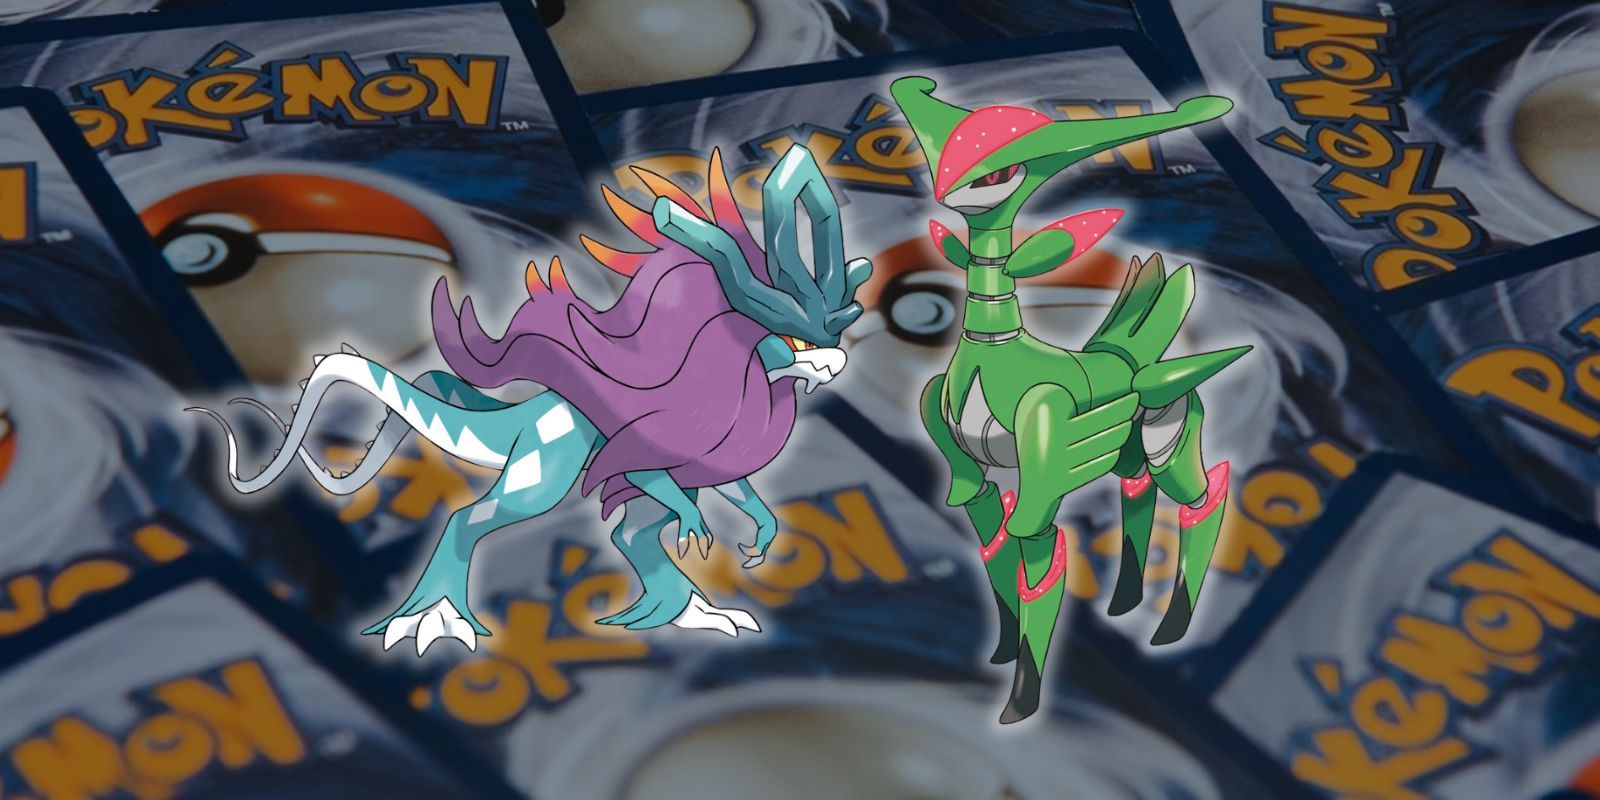 Pokémon TCG Temporal Forces – Release Date, New Cards, & Special Sets